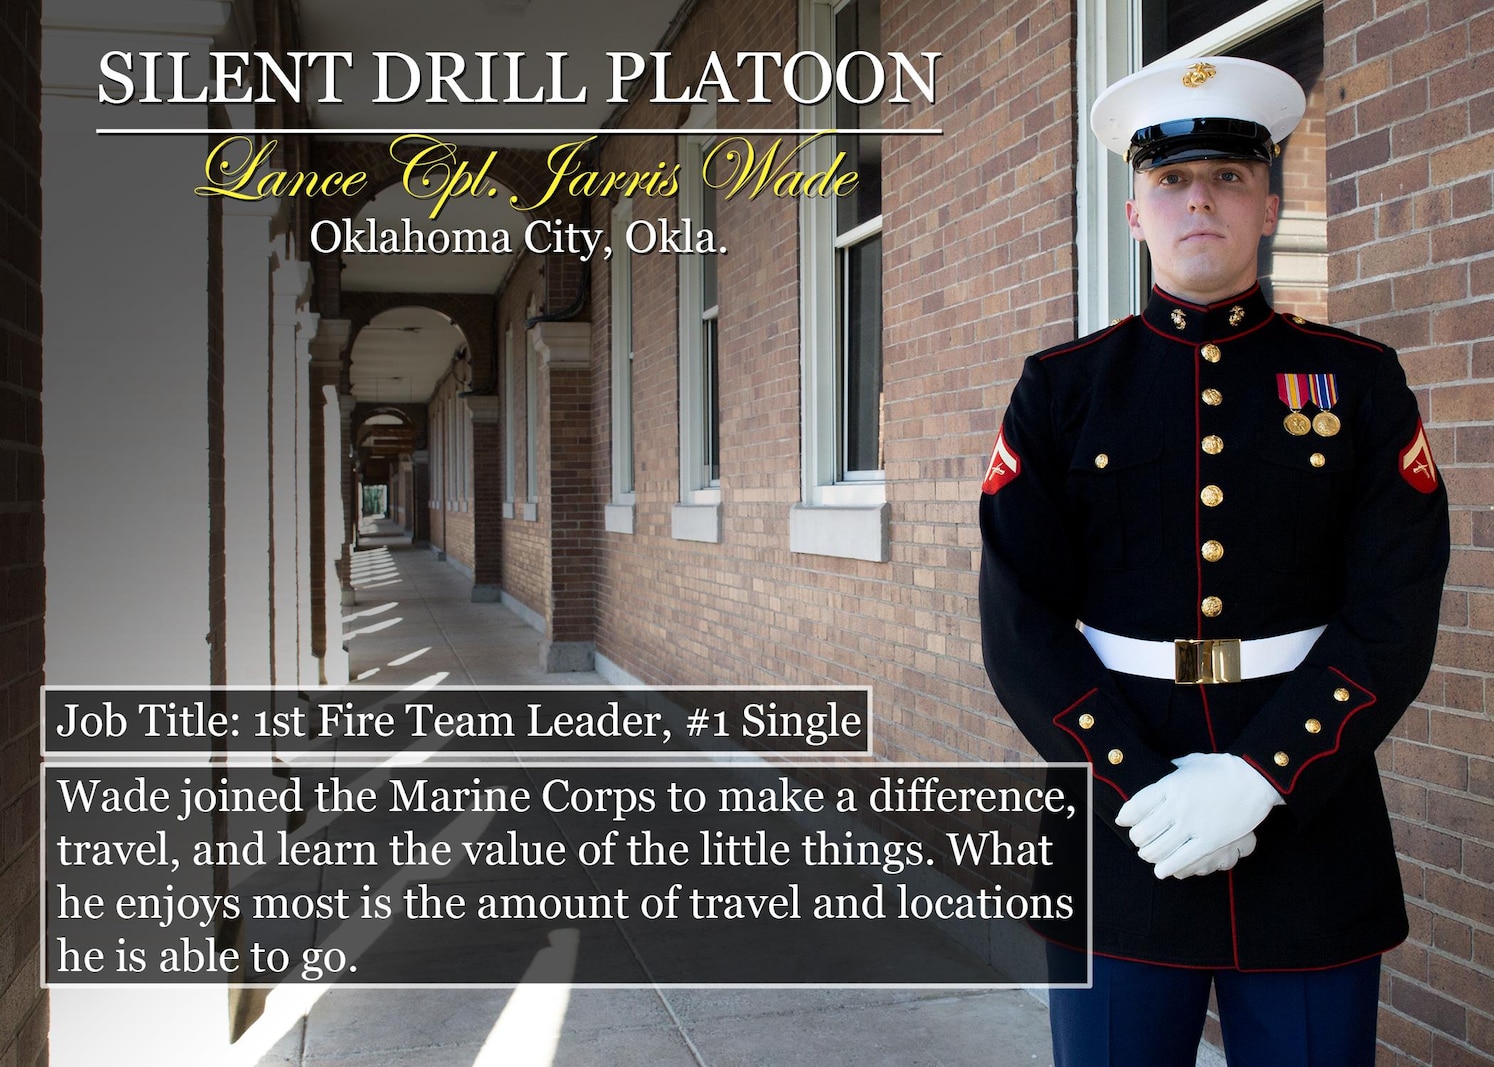 Lance Cpl. Jarris Wade
Oklahoma City, Okla.
Job Title: 1st Fire Team Leader, #1 Single
Wade joined the Marine Corps to make a difference, travel, and learn the value of the little things. What he enjoys most is the amount of travel and locations he is able to go.
(Official Marine Corps graphic by Cpl. Chi Nguyen/Released)